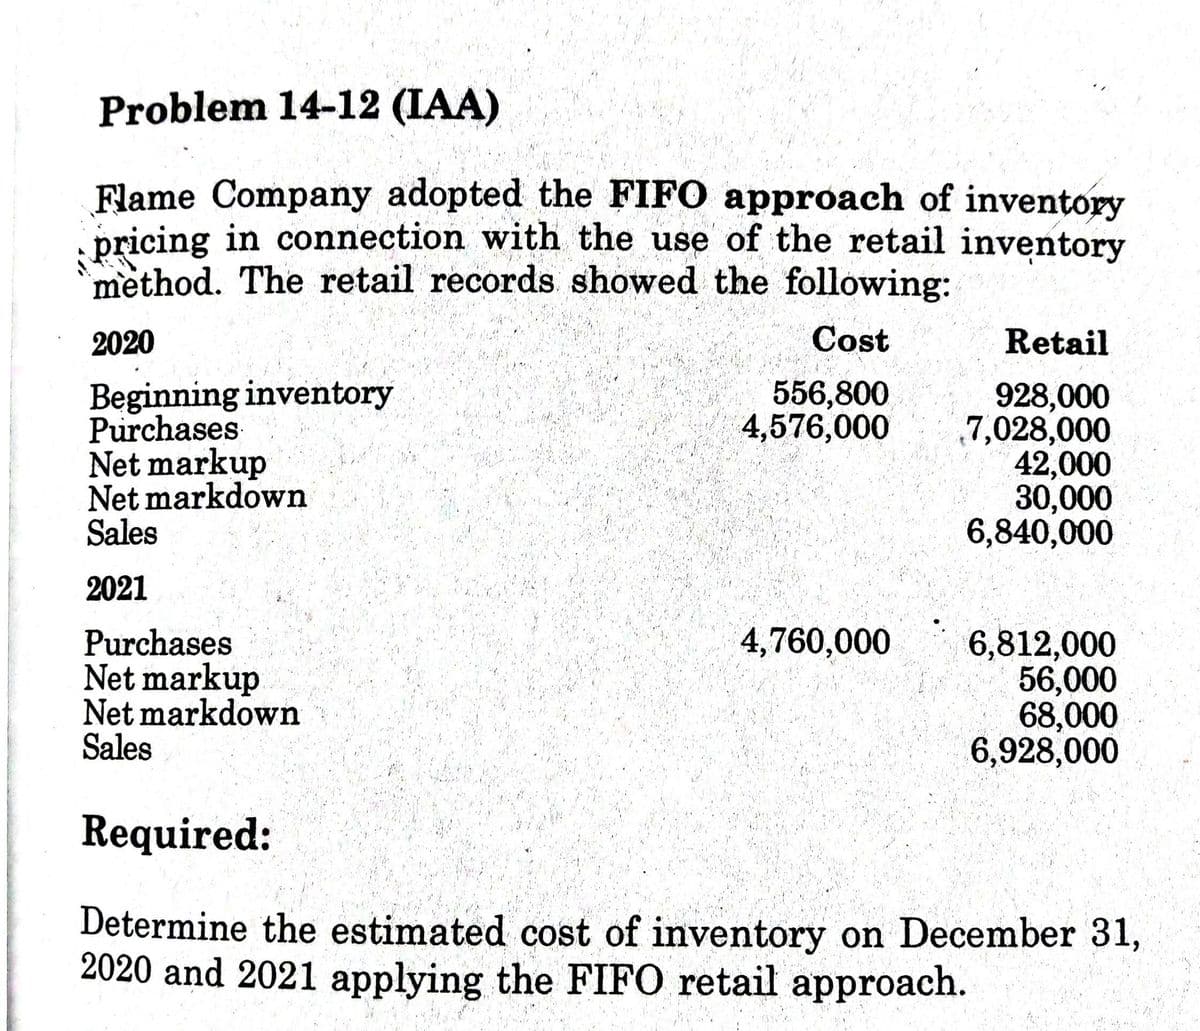 Problem 14-12 (IAA)
Flame Company adopted the FIFO approach of inventory
pricing in connection with the use of the retail inventory
method. The retail records showed the following:
2020
Cost
Retail
Beginning inventory
Purchases
Net markup
Net markdown
Sales
556,800
4,576,000
928,000
7,028,000
42,000
30,000
6,840,000
2021
4,760,000
Purchases
Net markup
Net markdown
Sales
6,812,000
56,000
68,000
6,928,000
Required:
Determine the estimated cost of inventory on December 31,
2020 and 2021 applying the FIFO retail approach.
